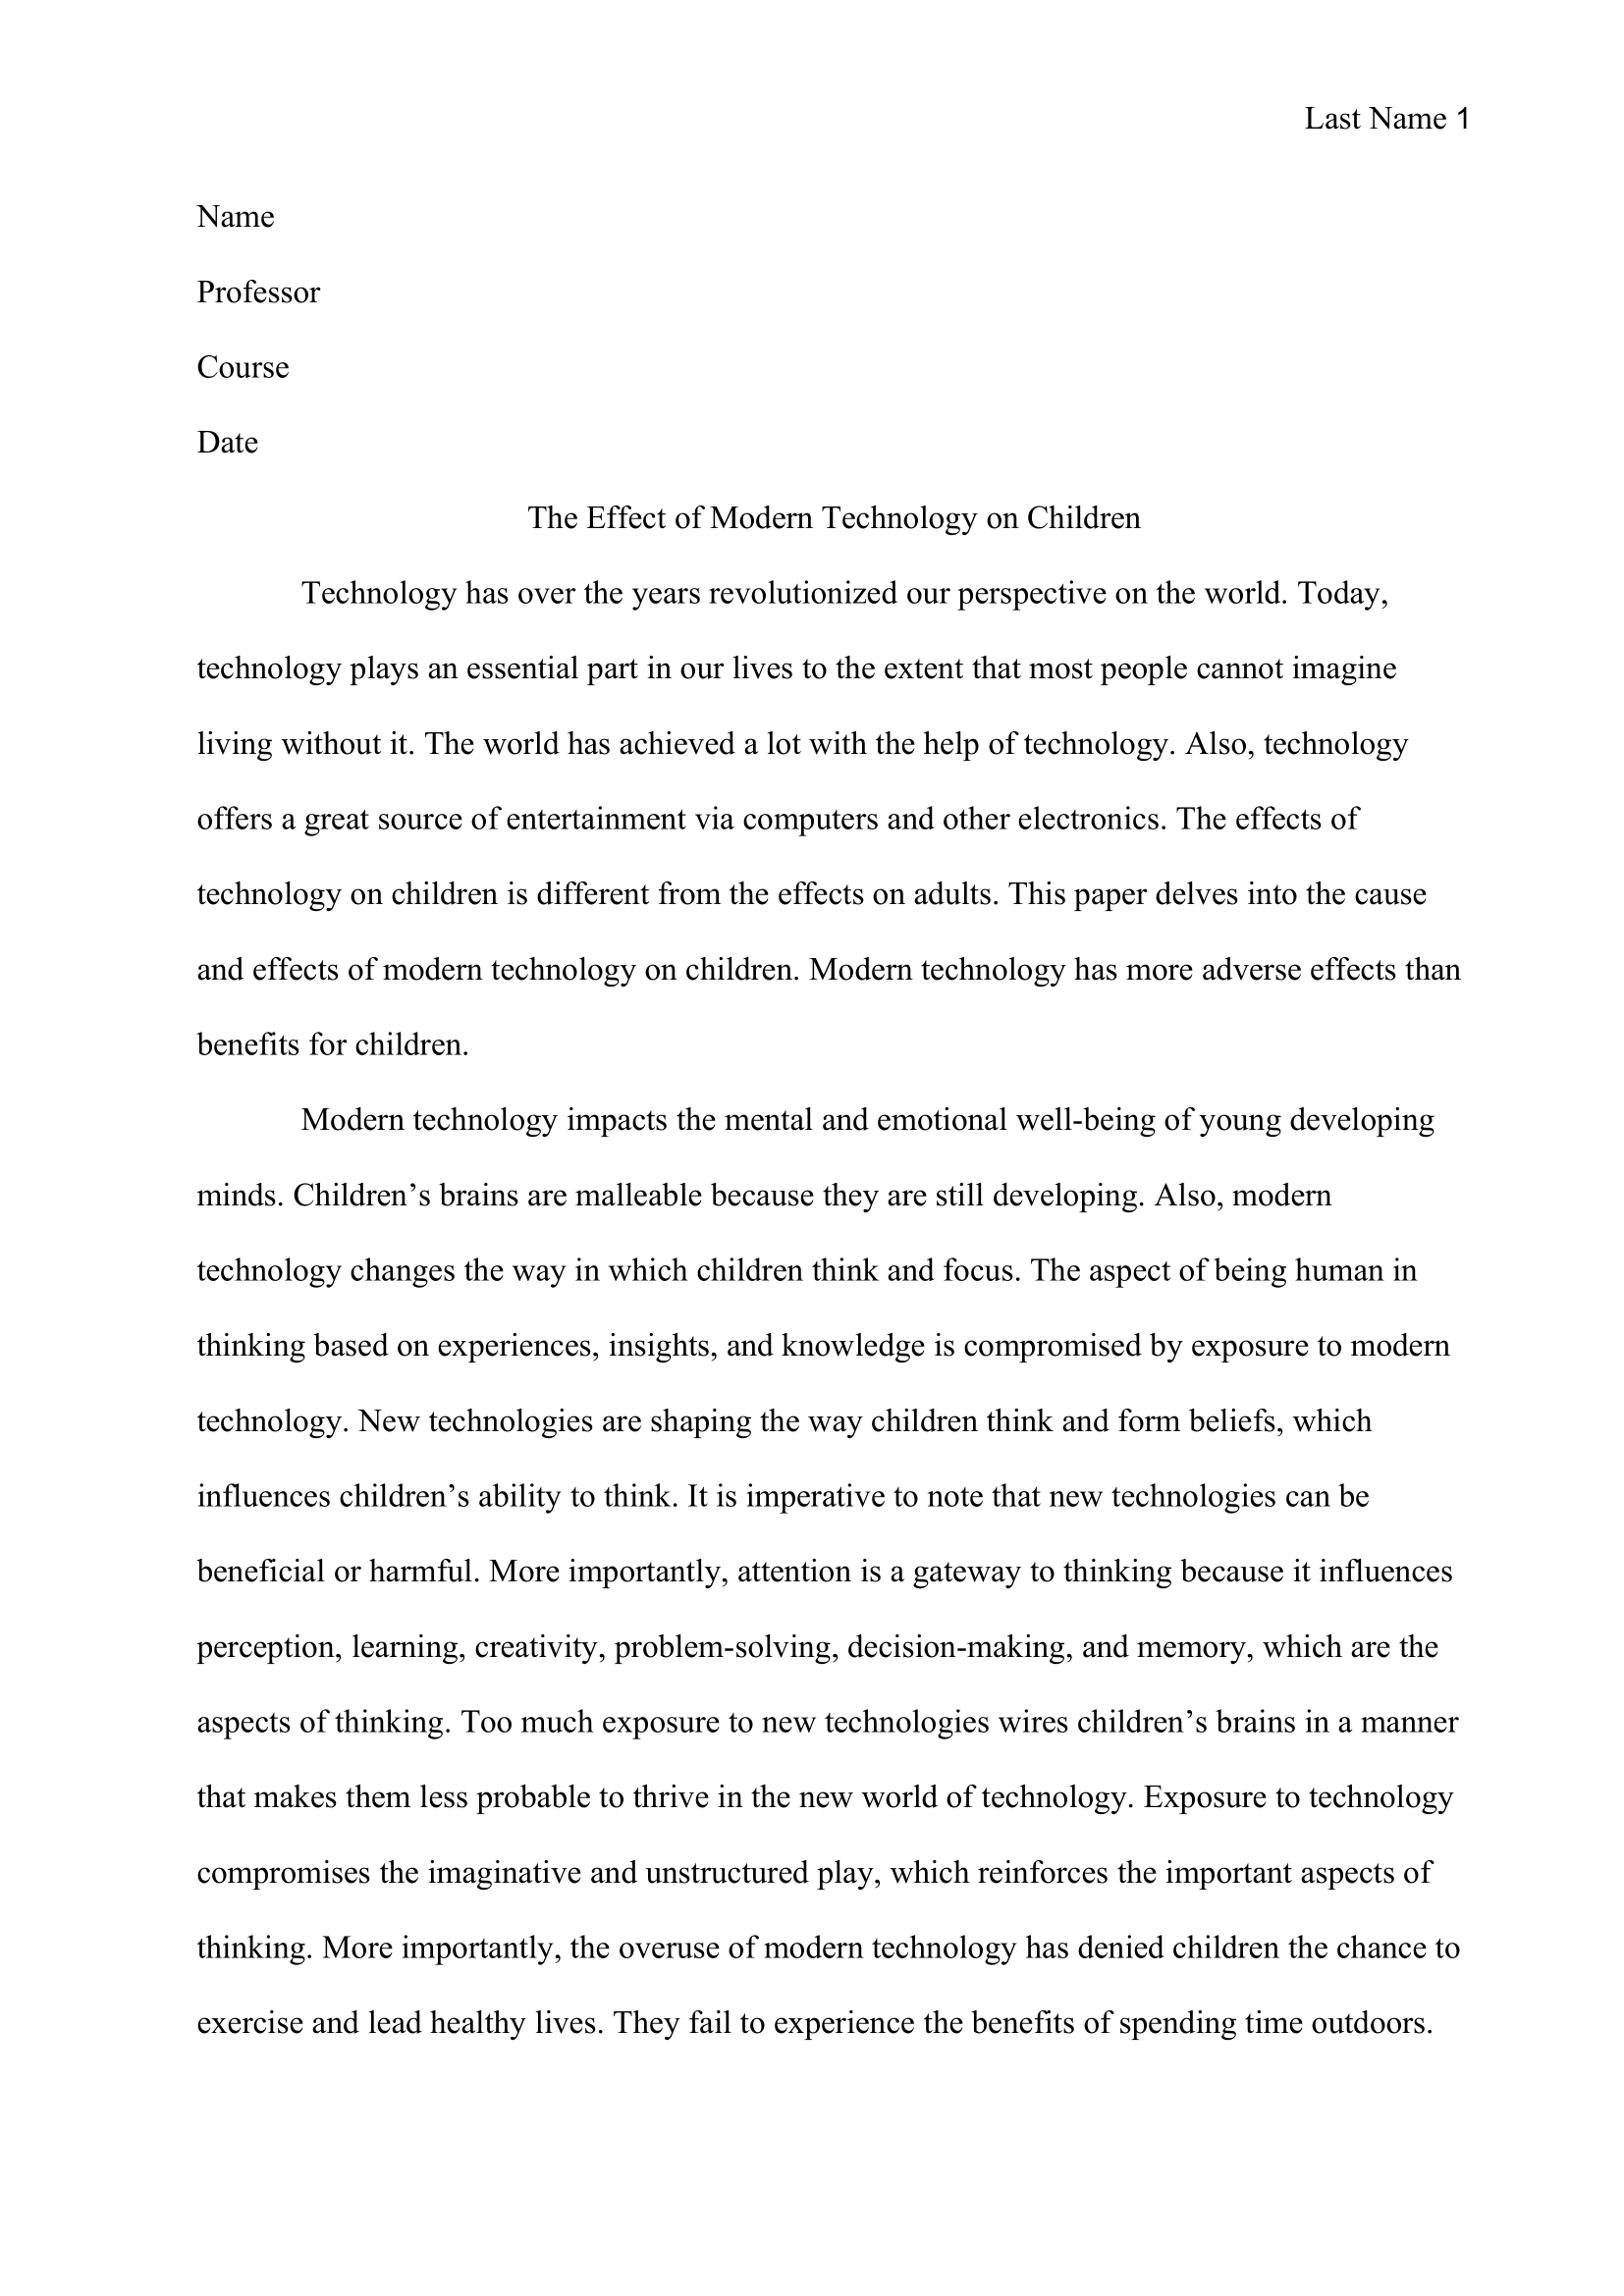 Examples of a cause and effect essay